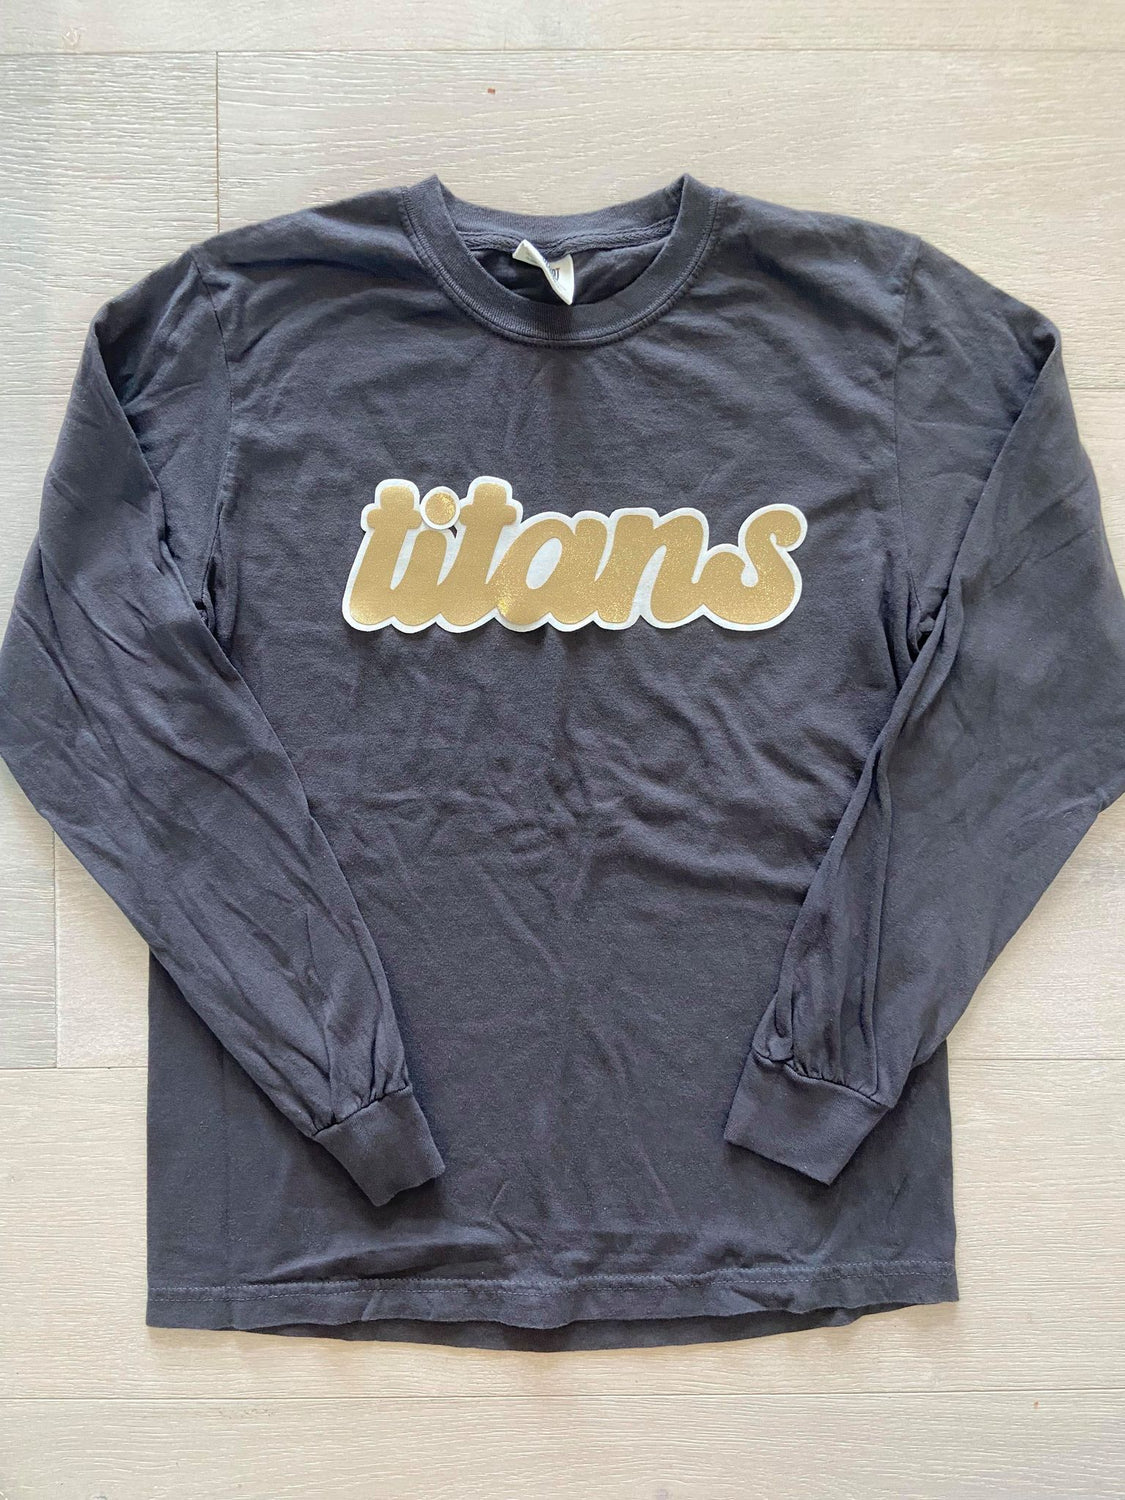 TITANS - DARK GREY COMFORT COLORS LONG SLEEVE (YOUTH + ADULT)